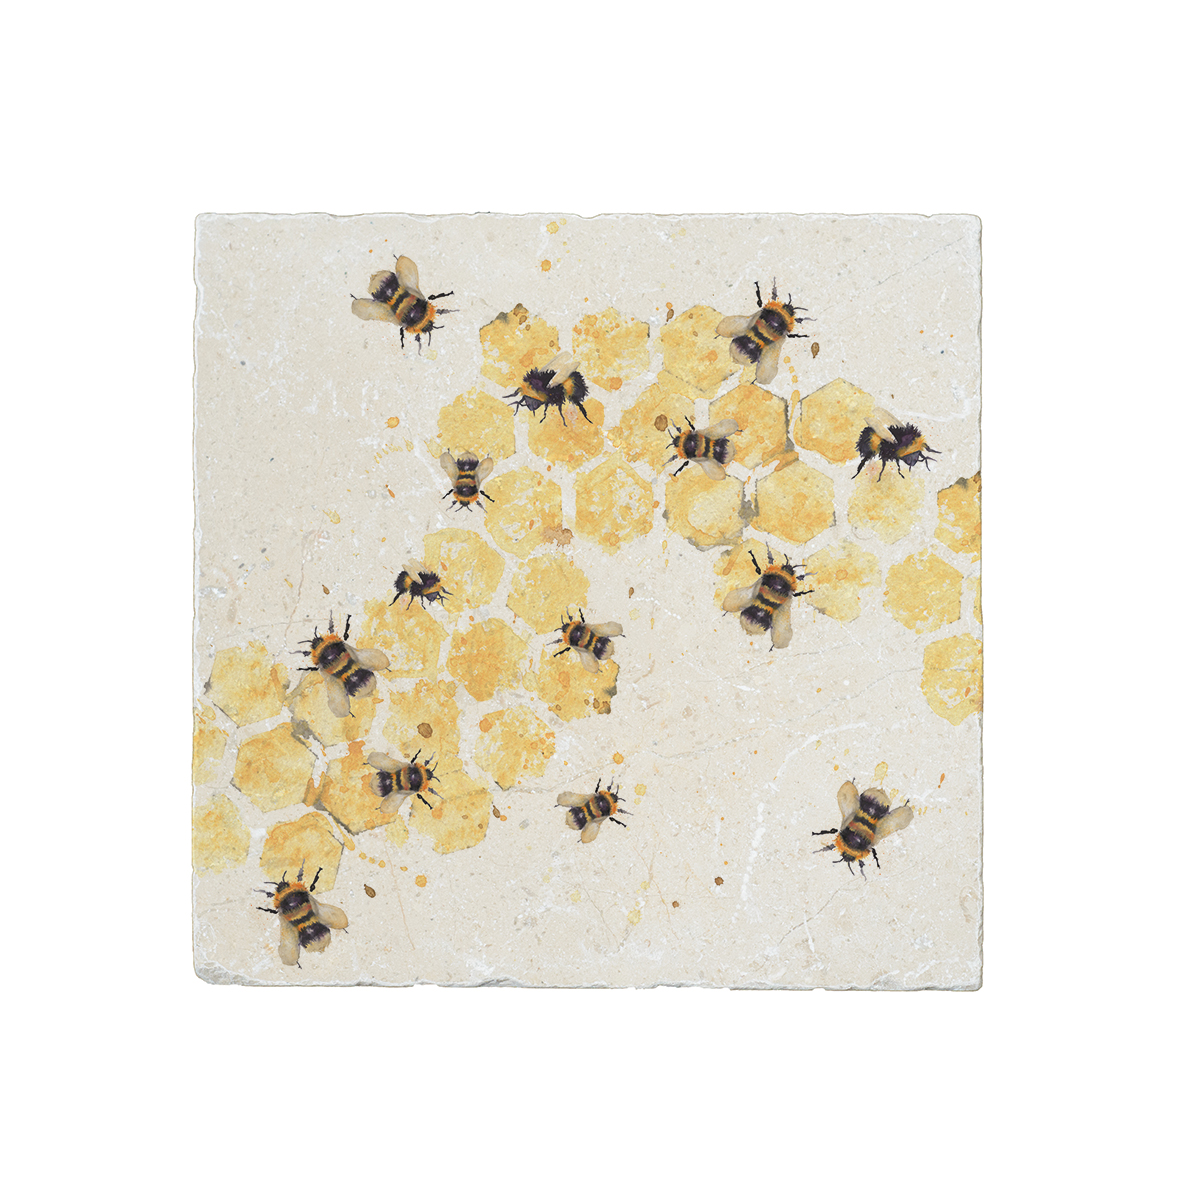 Marble cheese platter - Honeycomb bees (square)